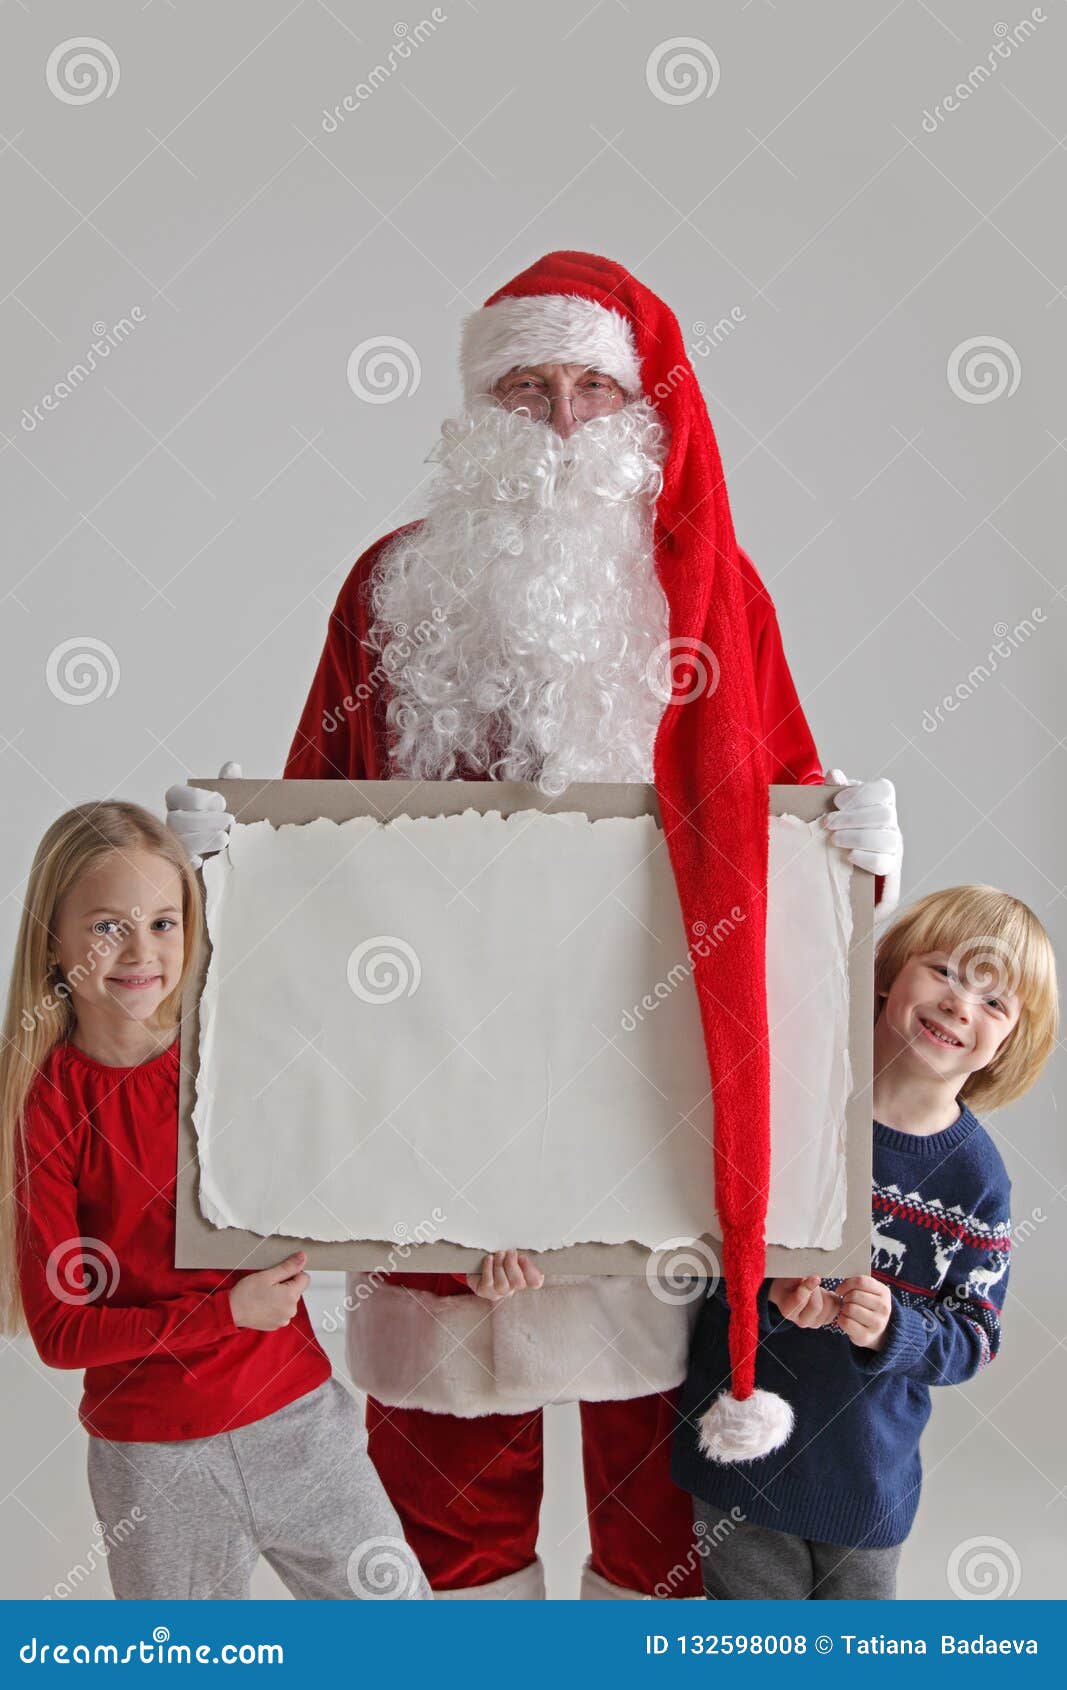 Santa Claus and children stock photo. Image of sign - 132598008